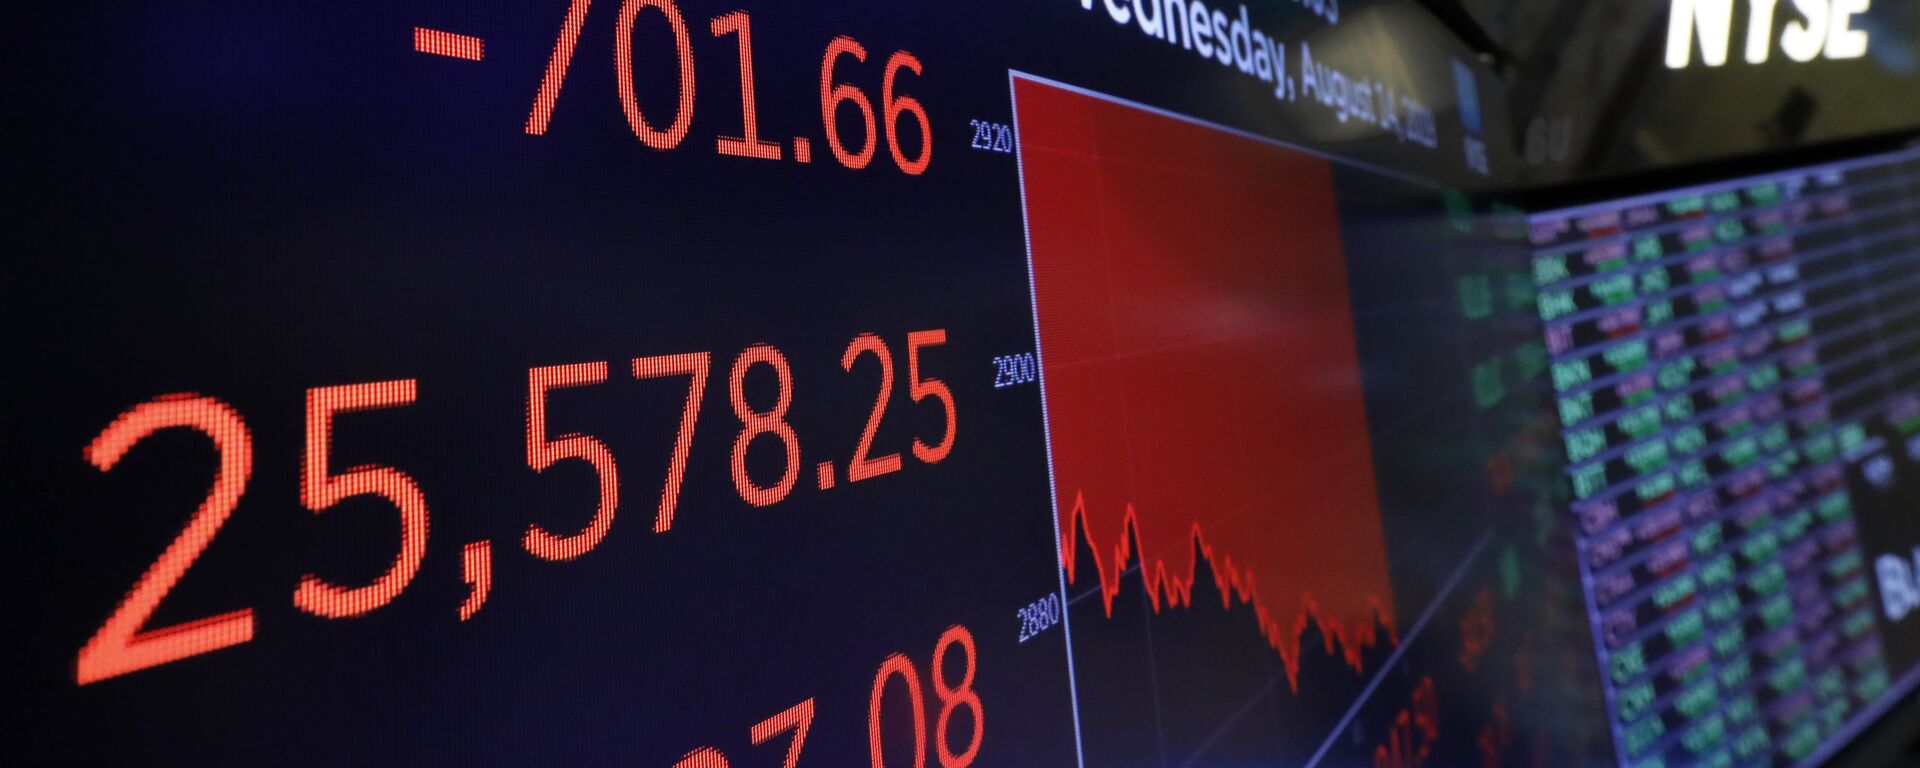 A screen above the trading floor shows an intraday number for the Dow Jones industrial average, at the New York Stock Exchange, Wednesday, Aug. 14, 2019. Stocks are falling sharply after the bond market threw up another warning flag on the economy.  - Sputnik International, 1920, 05.04.2021